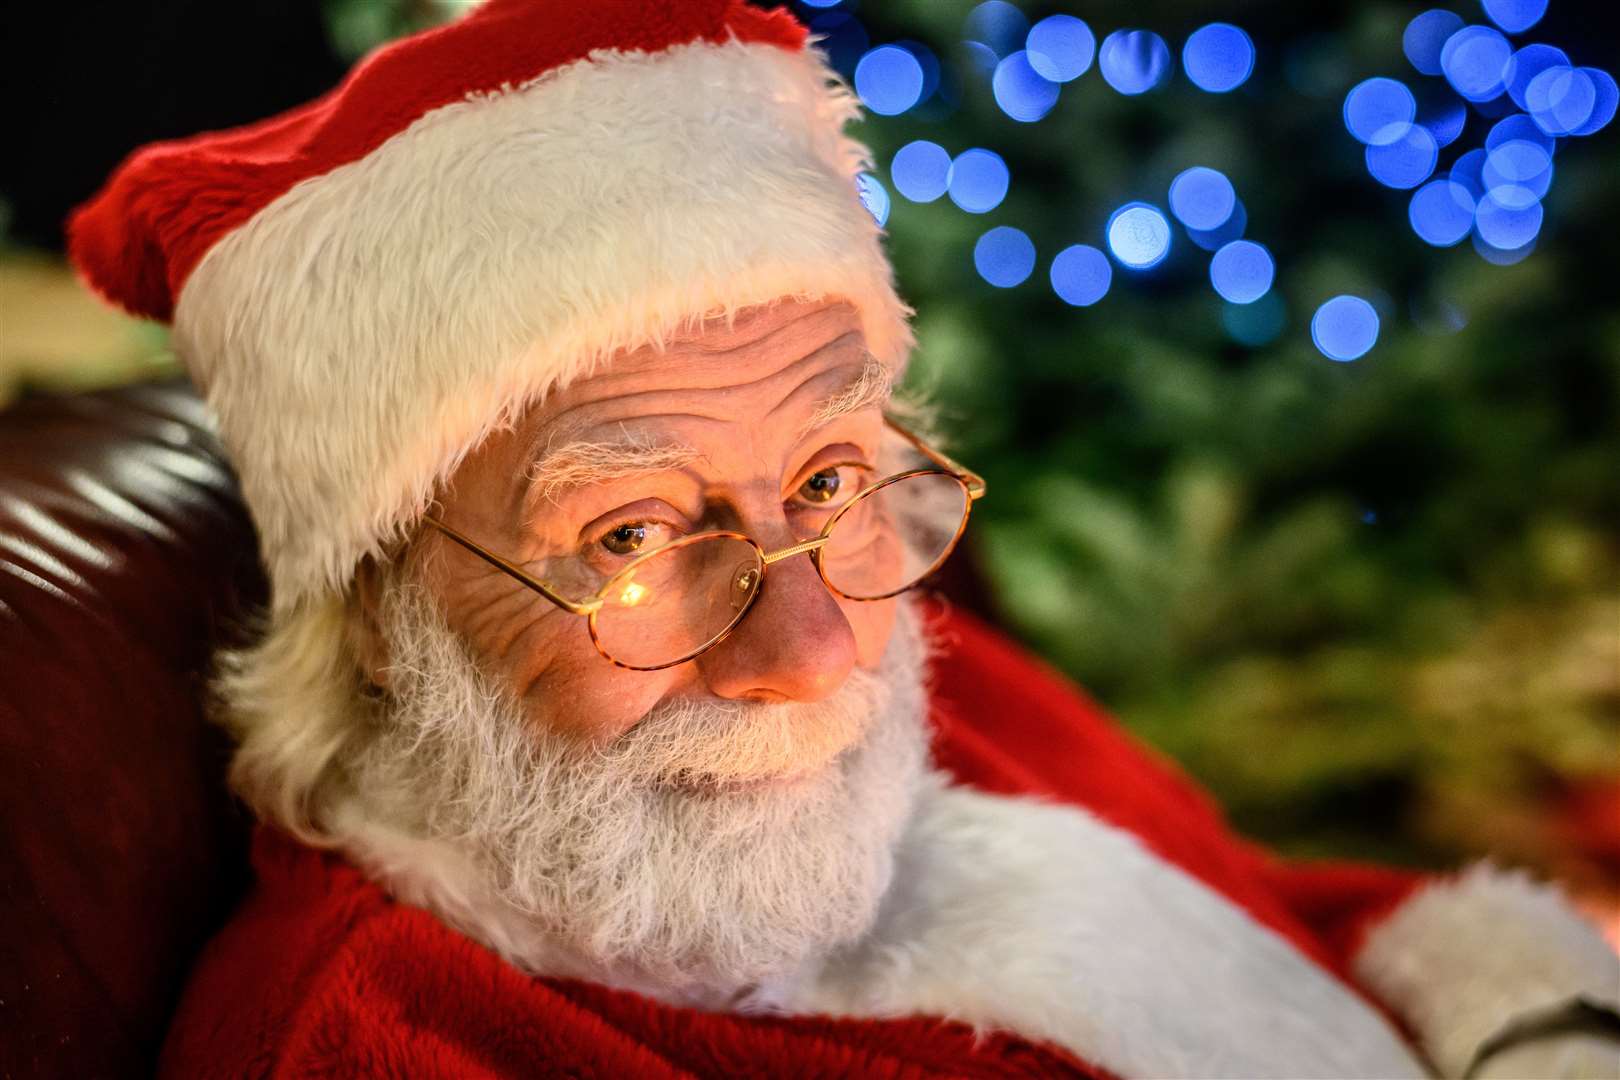 Will you catch a glimpse of Santa during the evening?